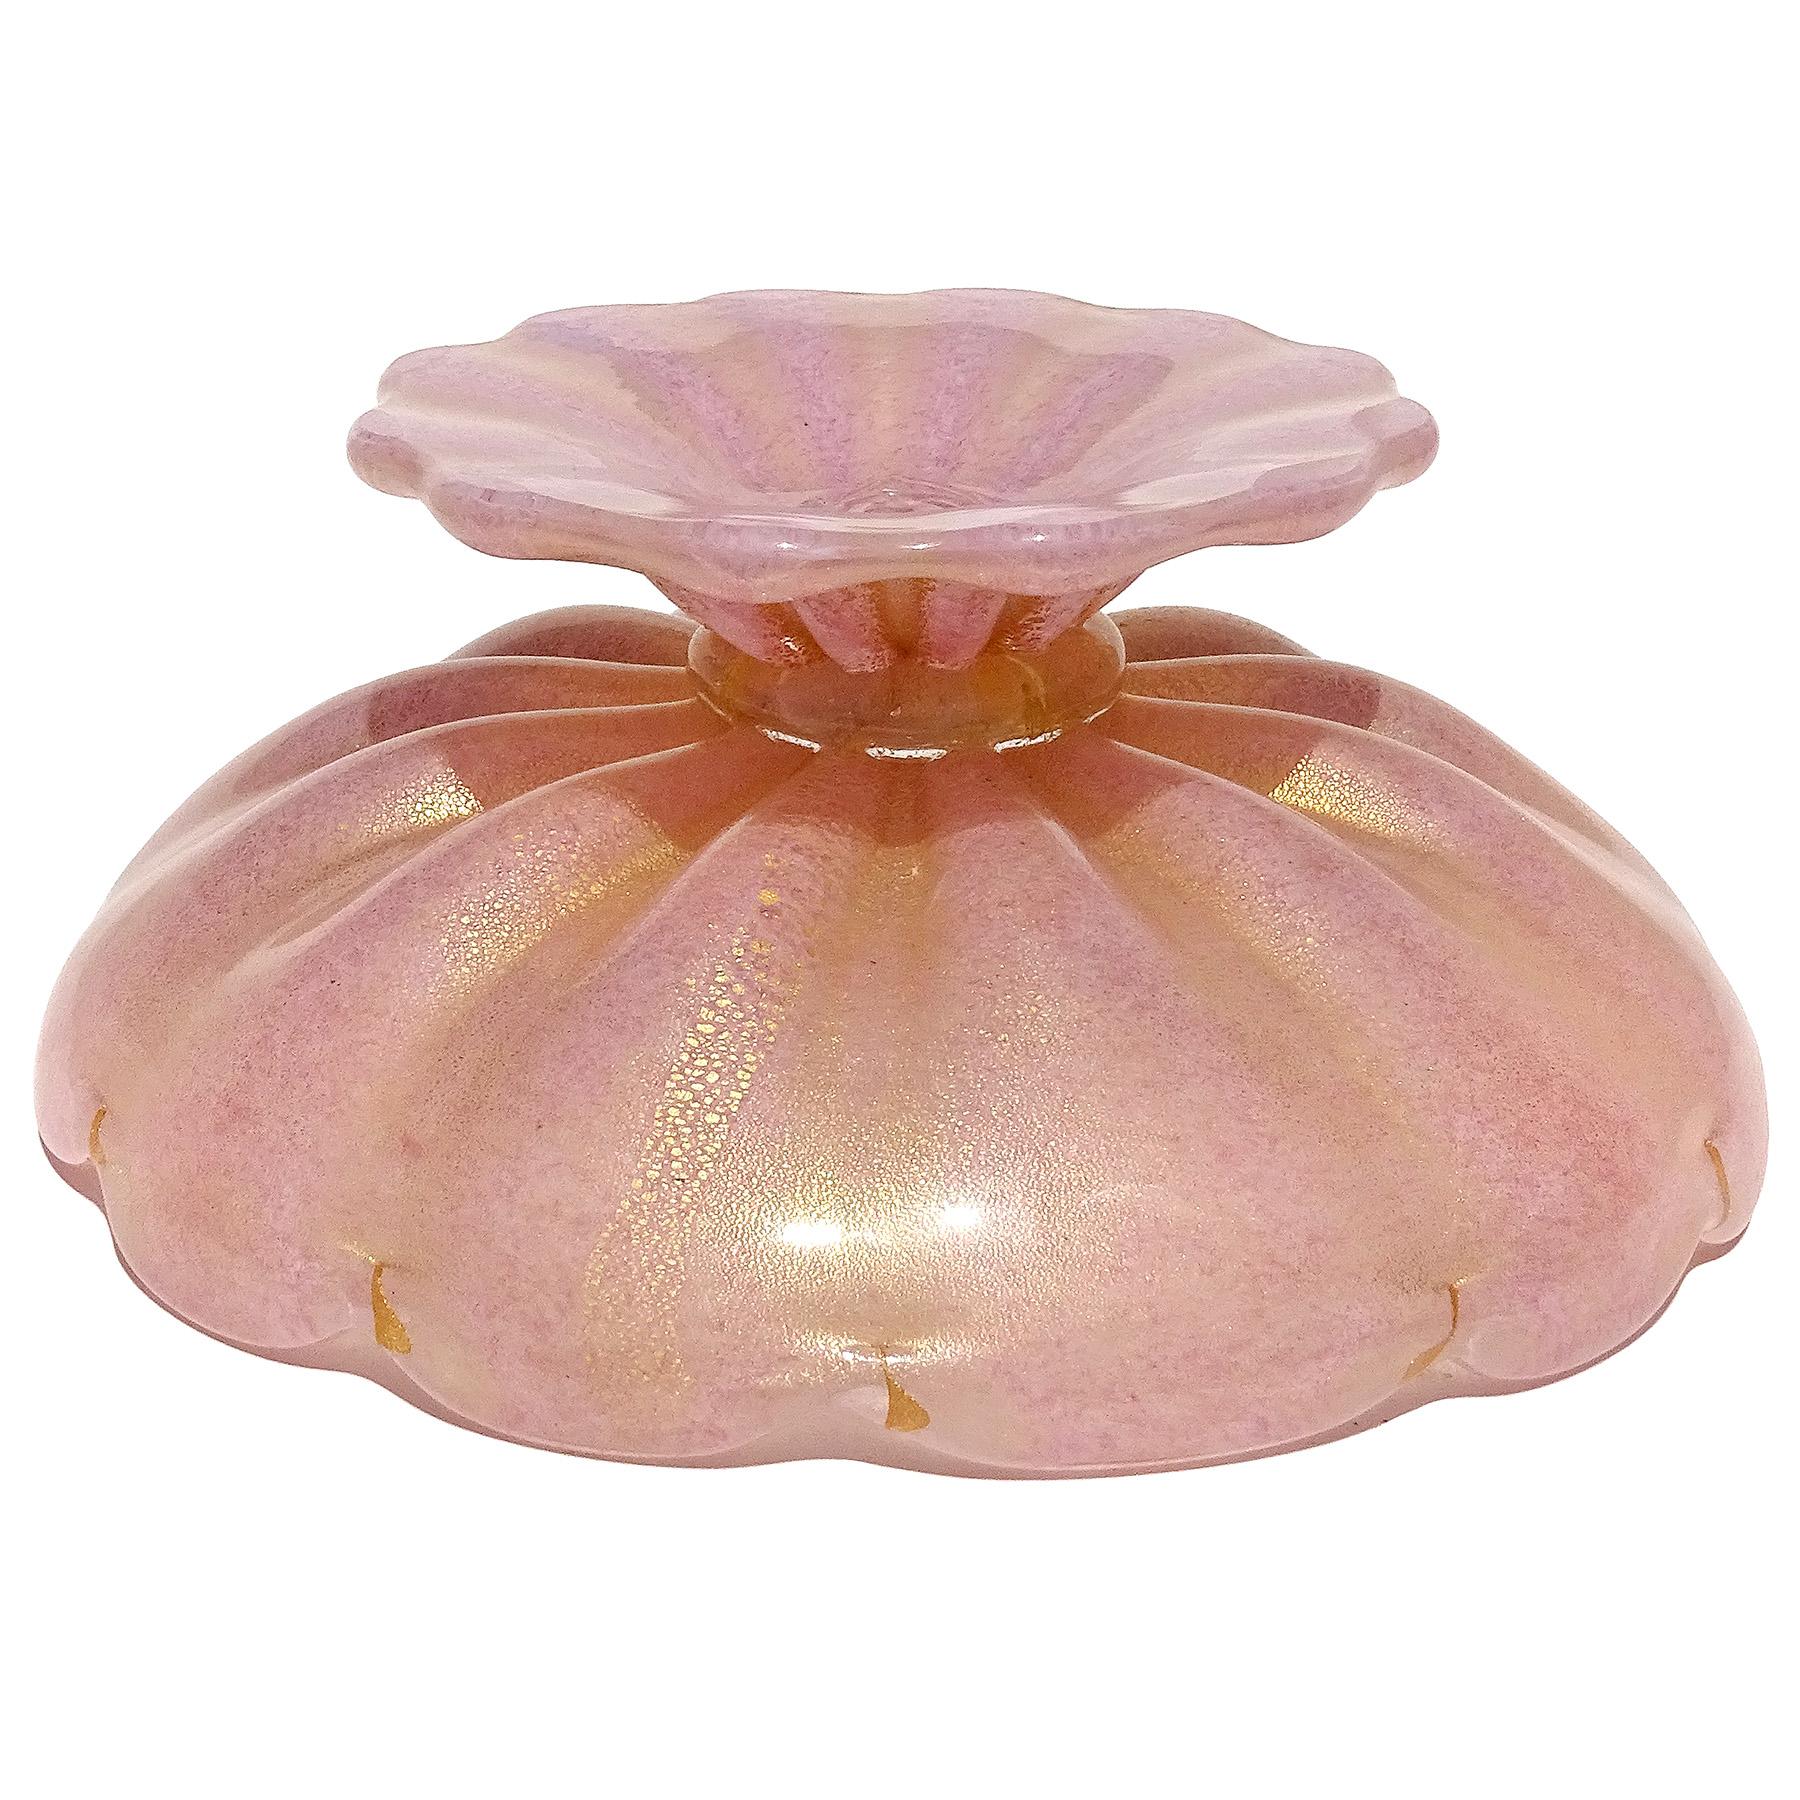 Mid-20th Century Barovier Toso Murano Pink Gold Flecks Italian Art Glass Ribbed Compote Bowl For Sale